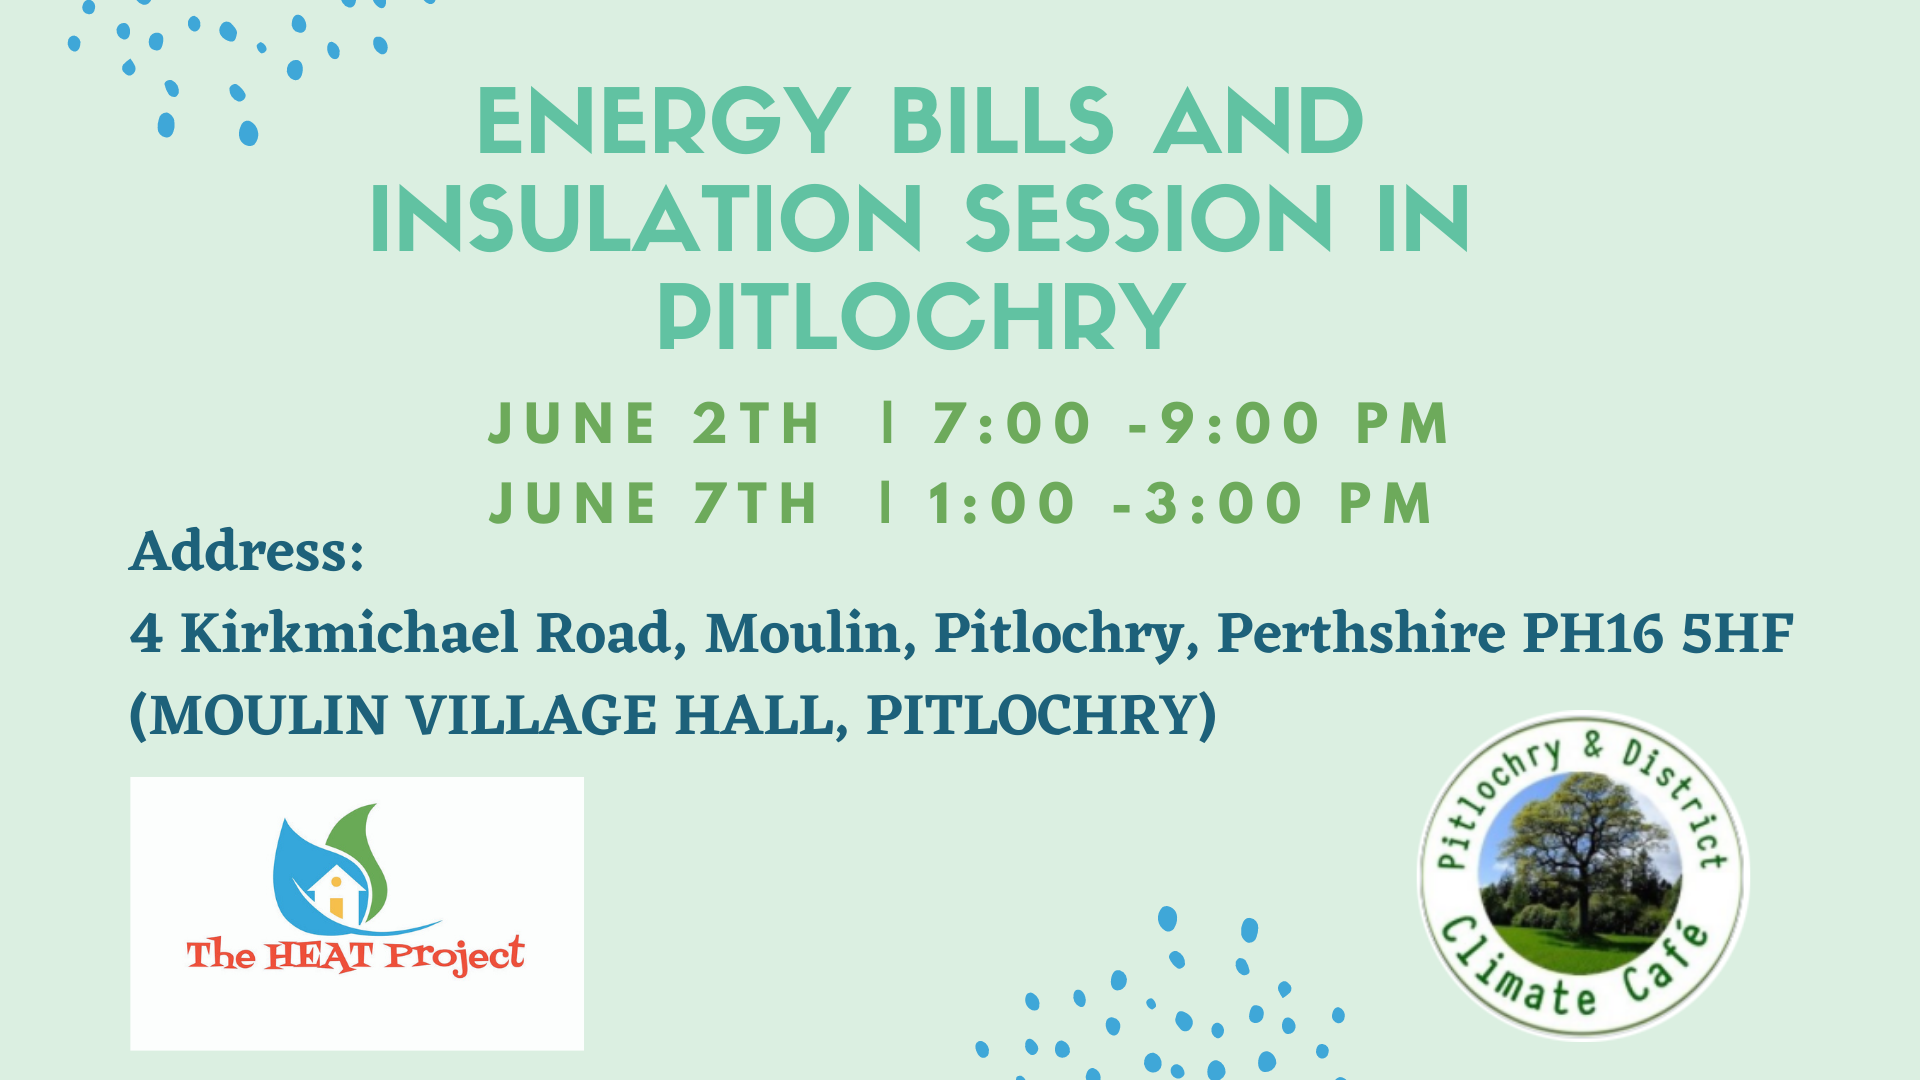 Energy bills and insulation session in Pitlochry